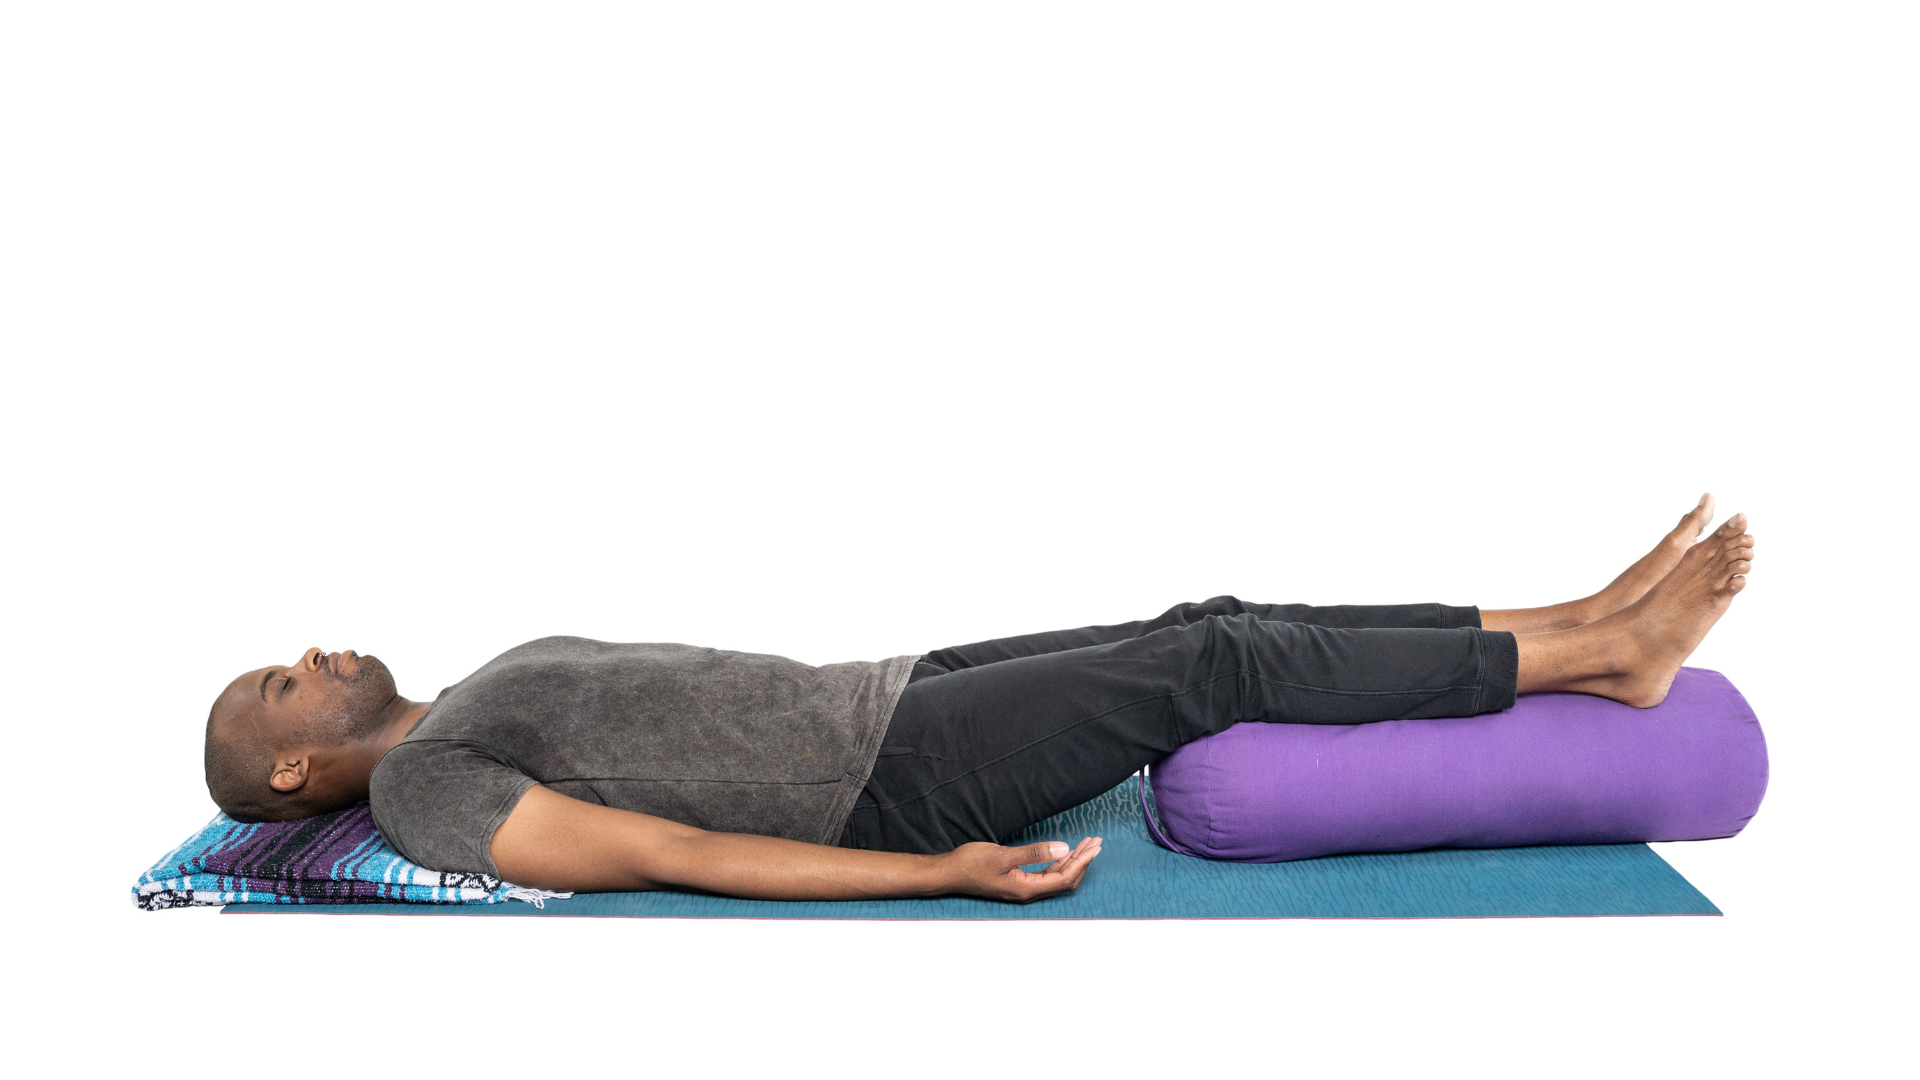 Savasana or Corpse Pose is a calming and restful pose.